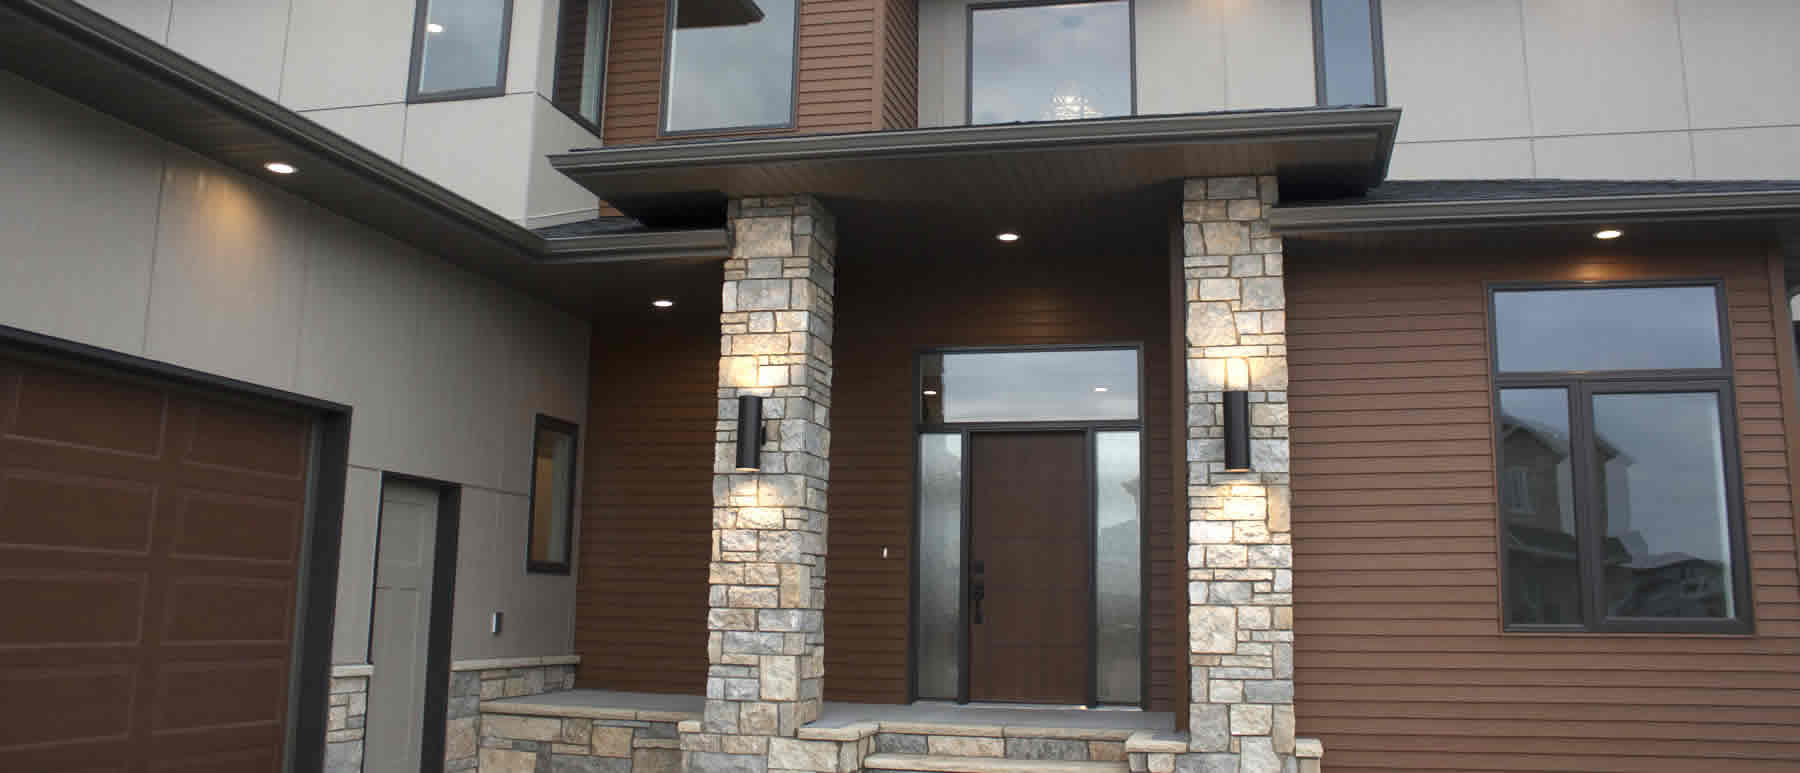 T&S Custom Homes, Inc. of Fargo, ND  - Home page banner 1